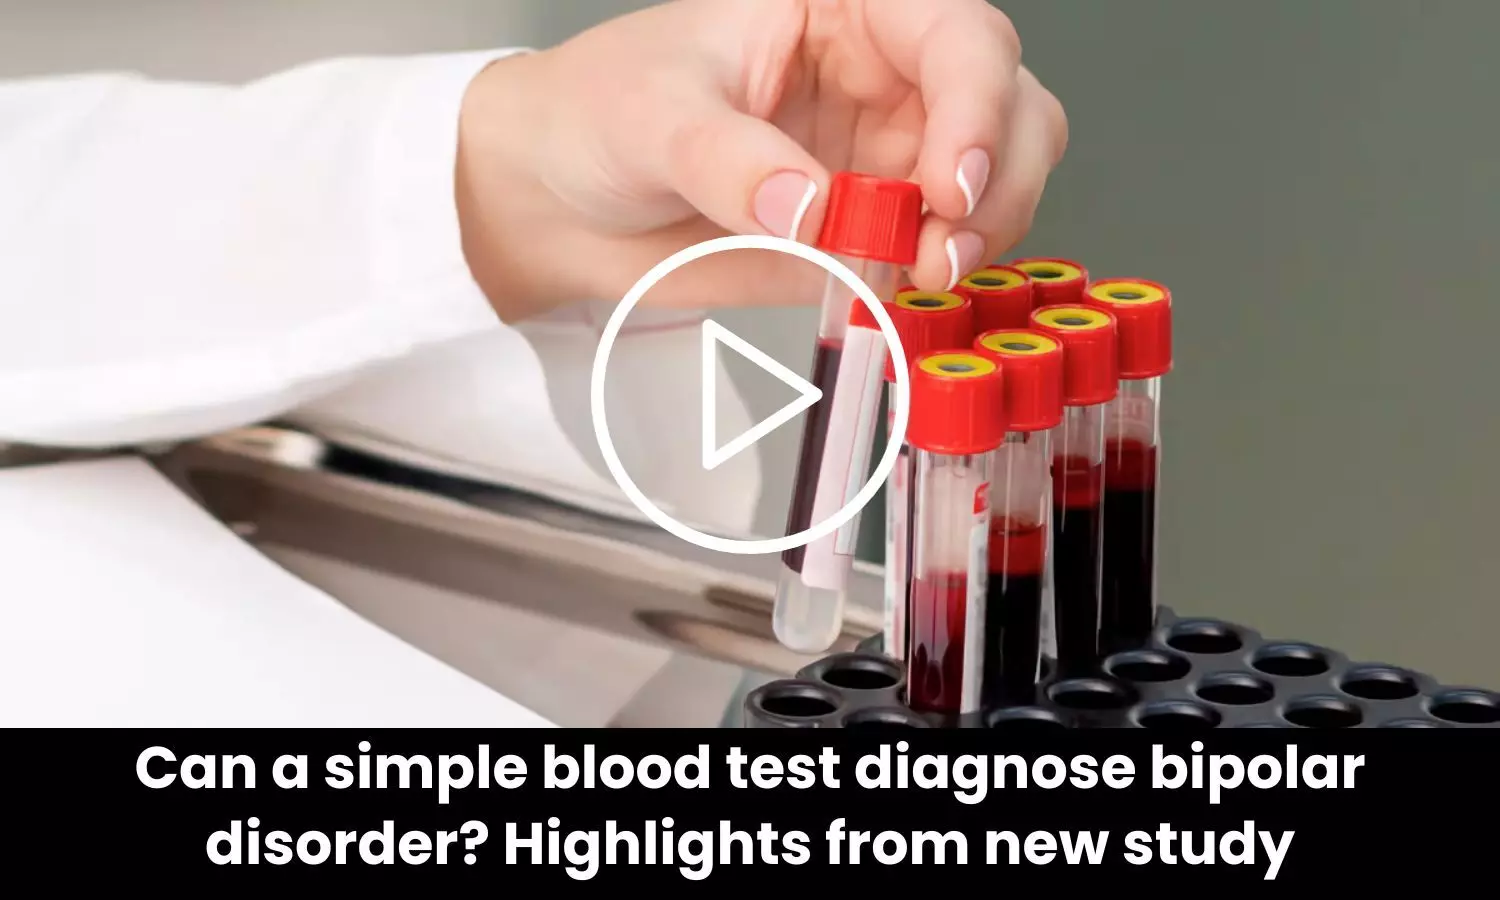 Can a simple blood test diagnose bipolar disorder? Highlights from new study